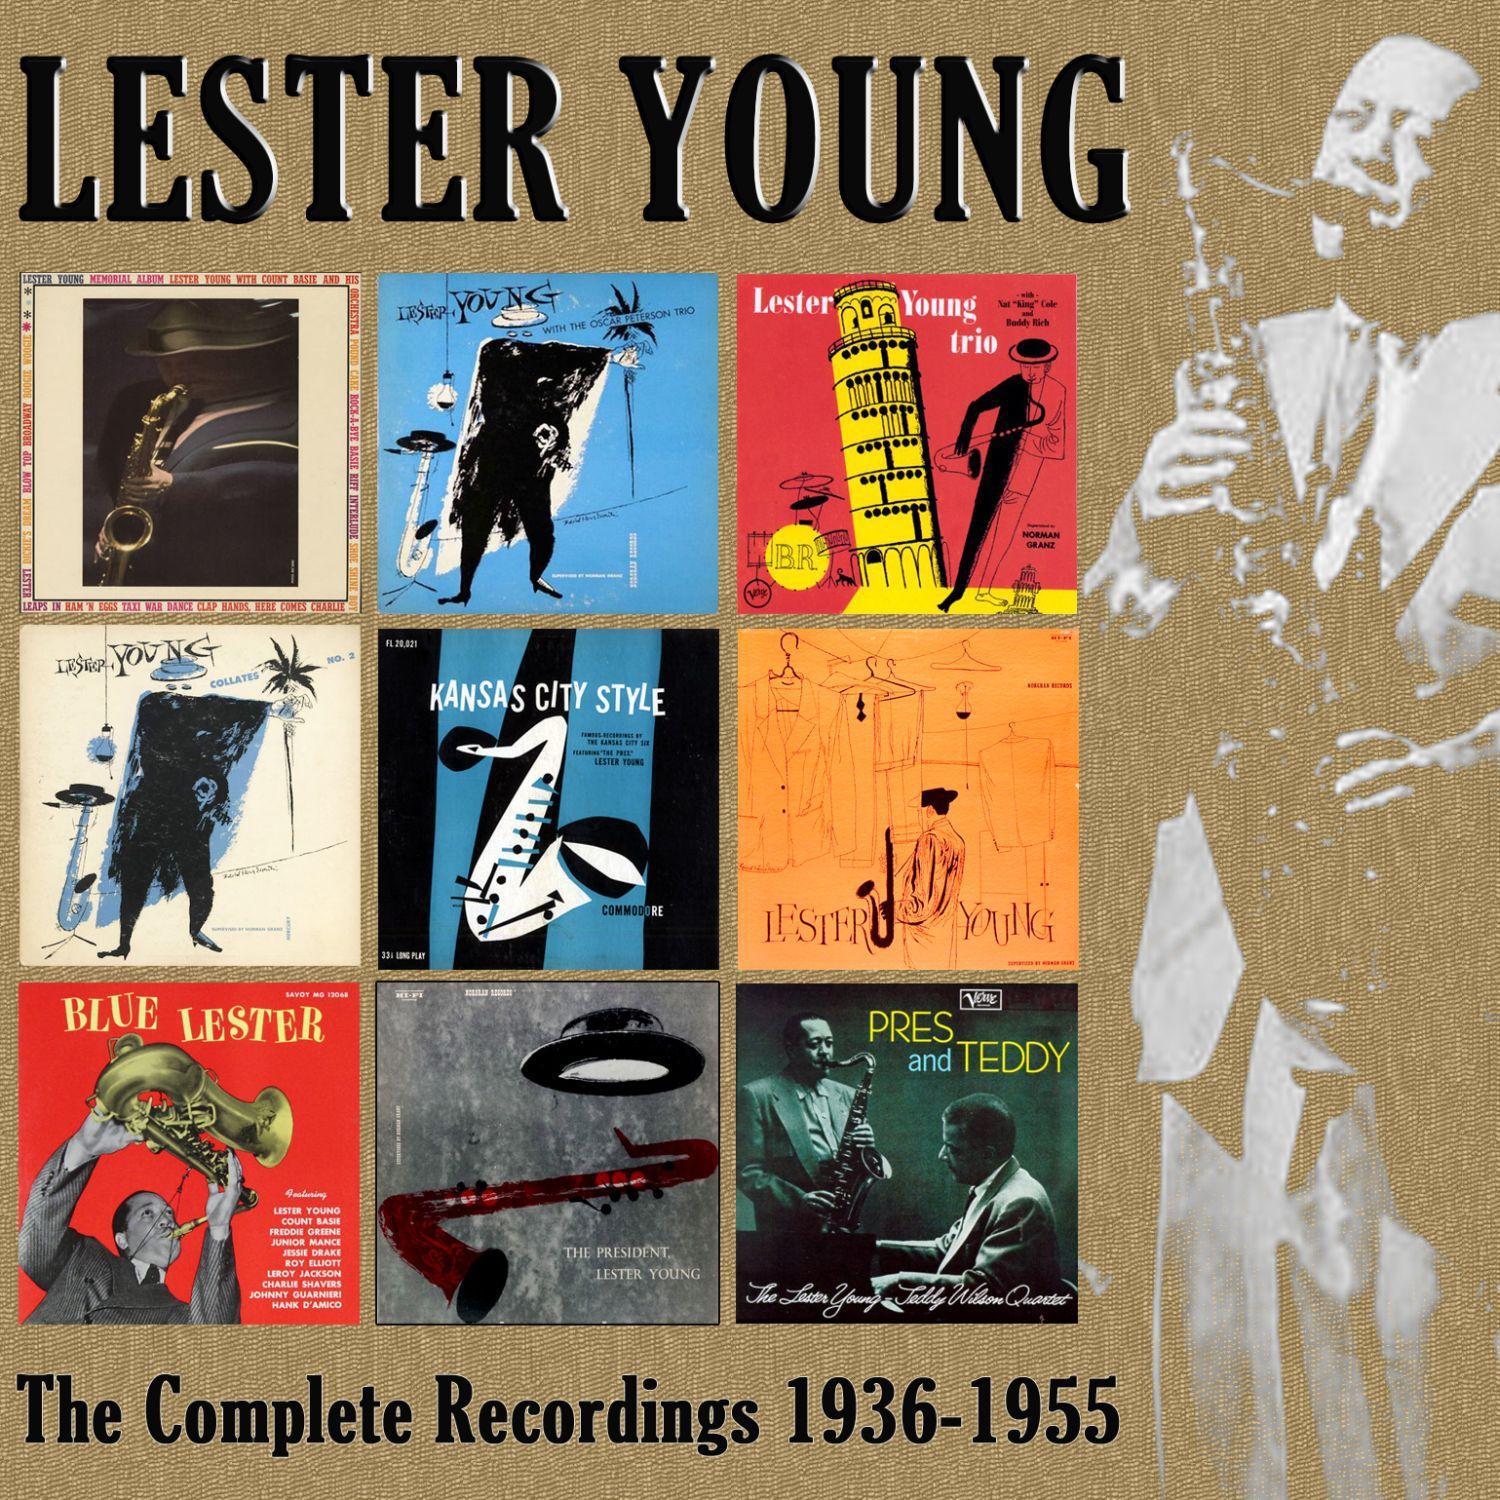 The Complete Recordings: 1936-1955